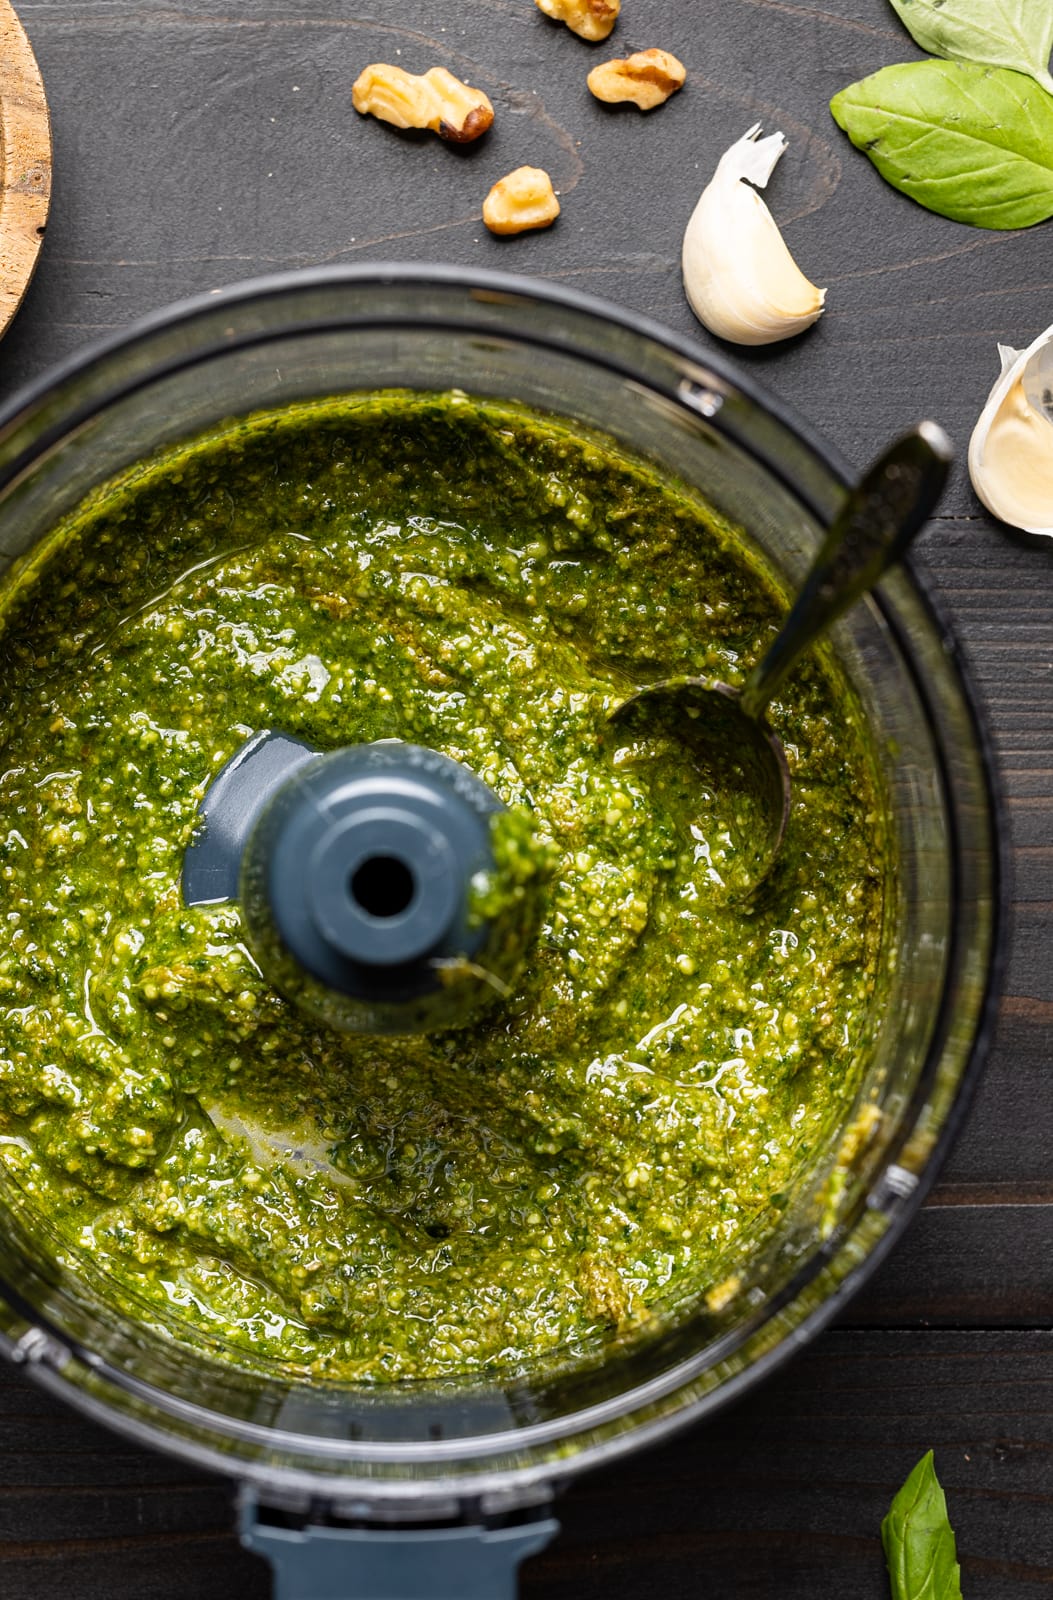 Pesto sauce in a food processor on a black wood table with garnishes of walnuts and garlic cloves.